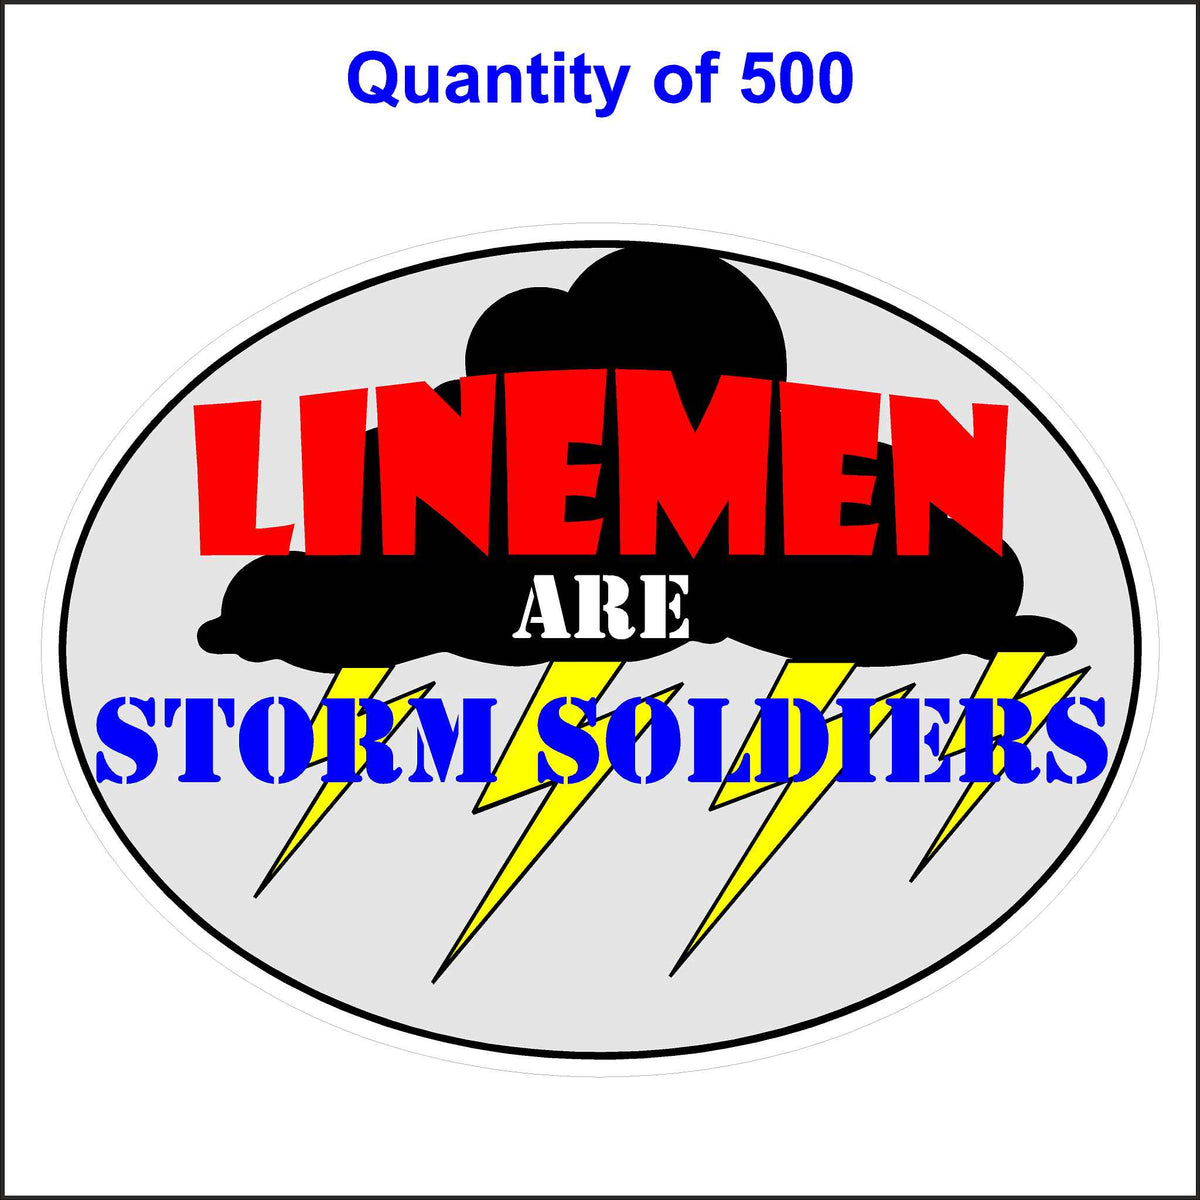 Gray Lineman Are Storm Soldiers Stickers. 500 Quantity.